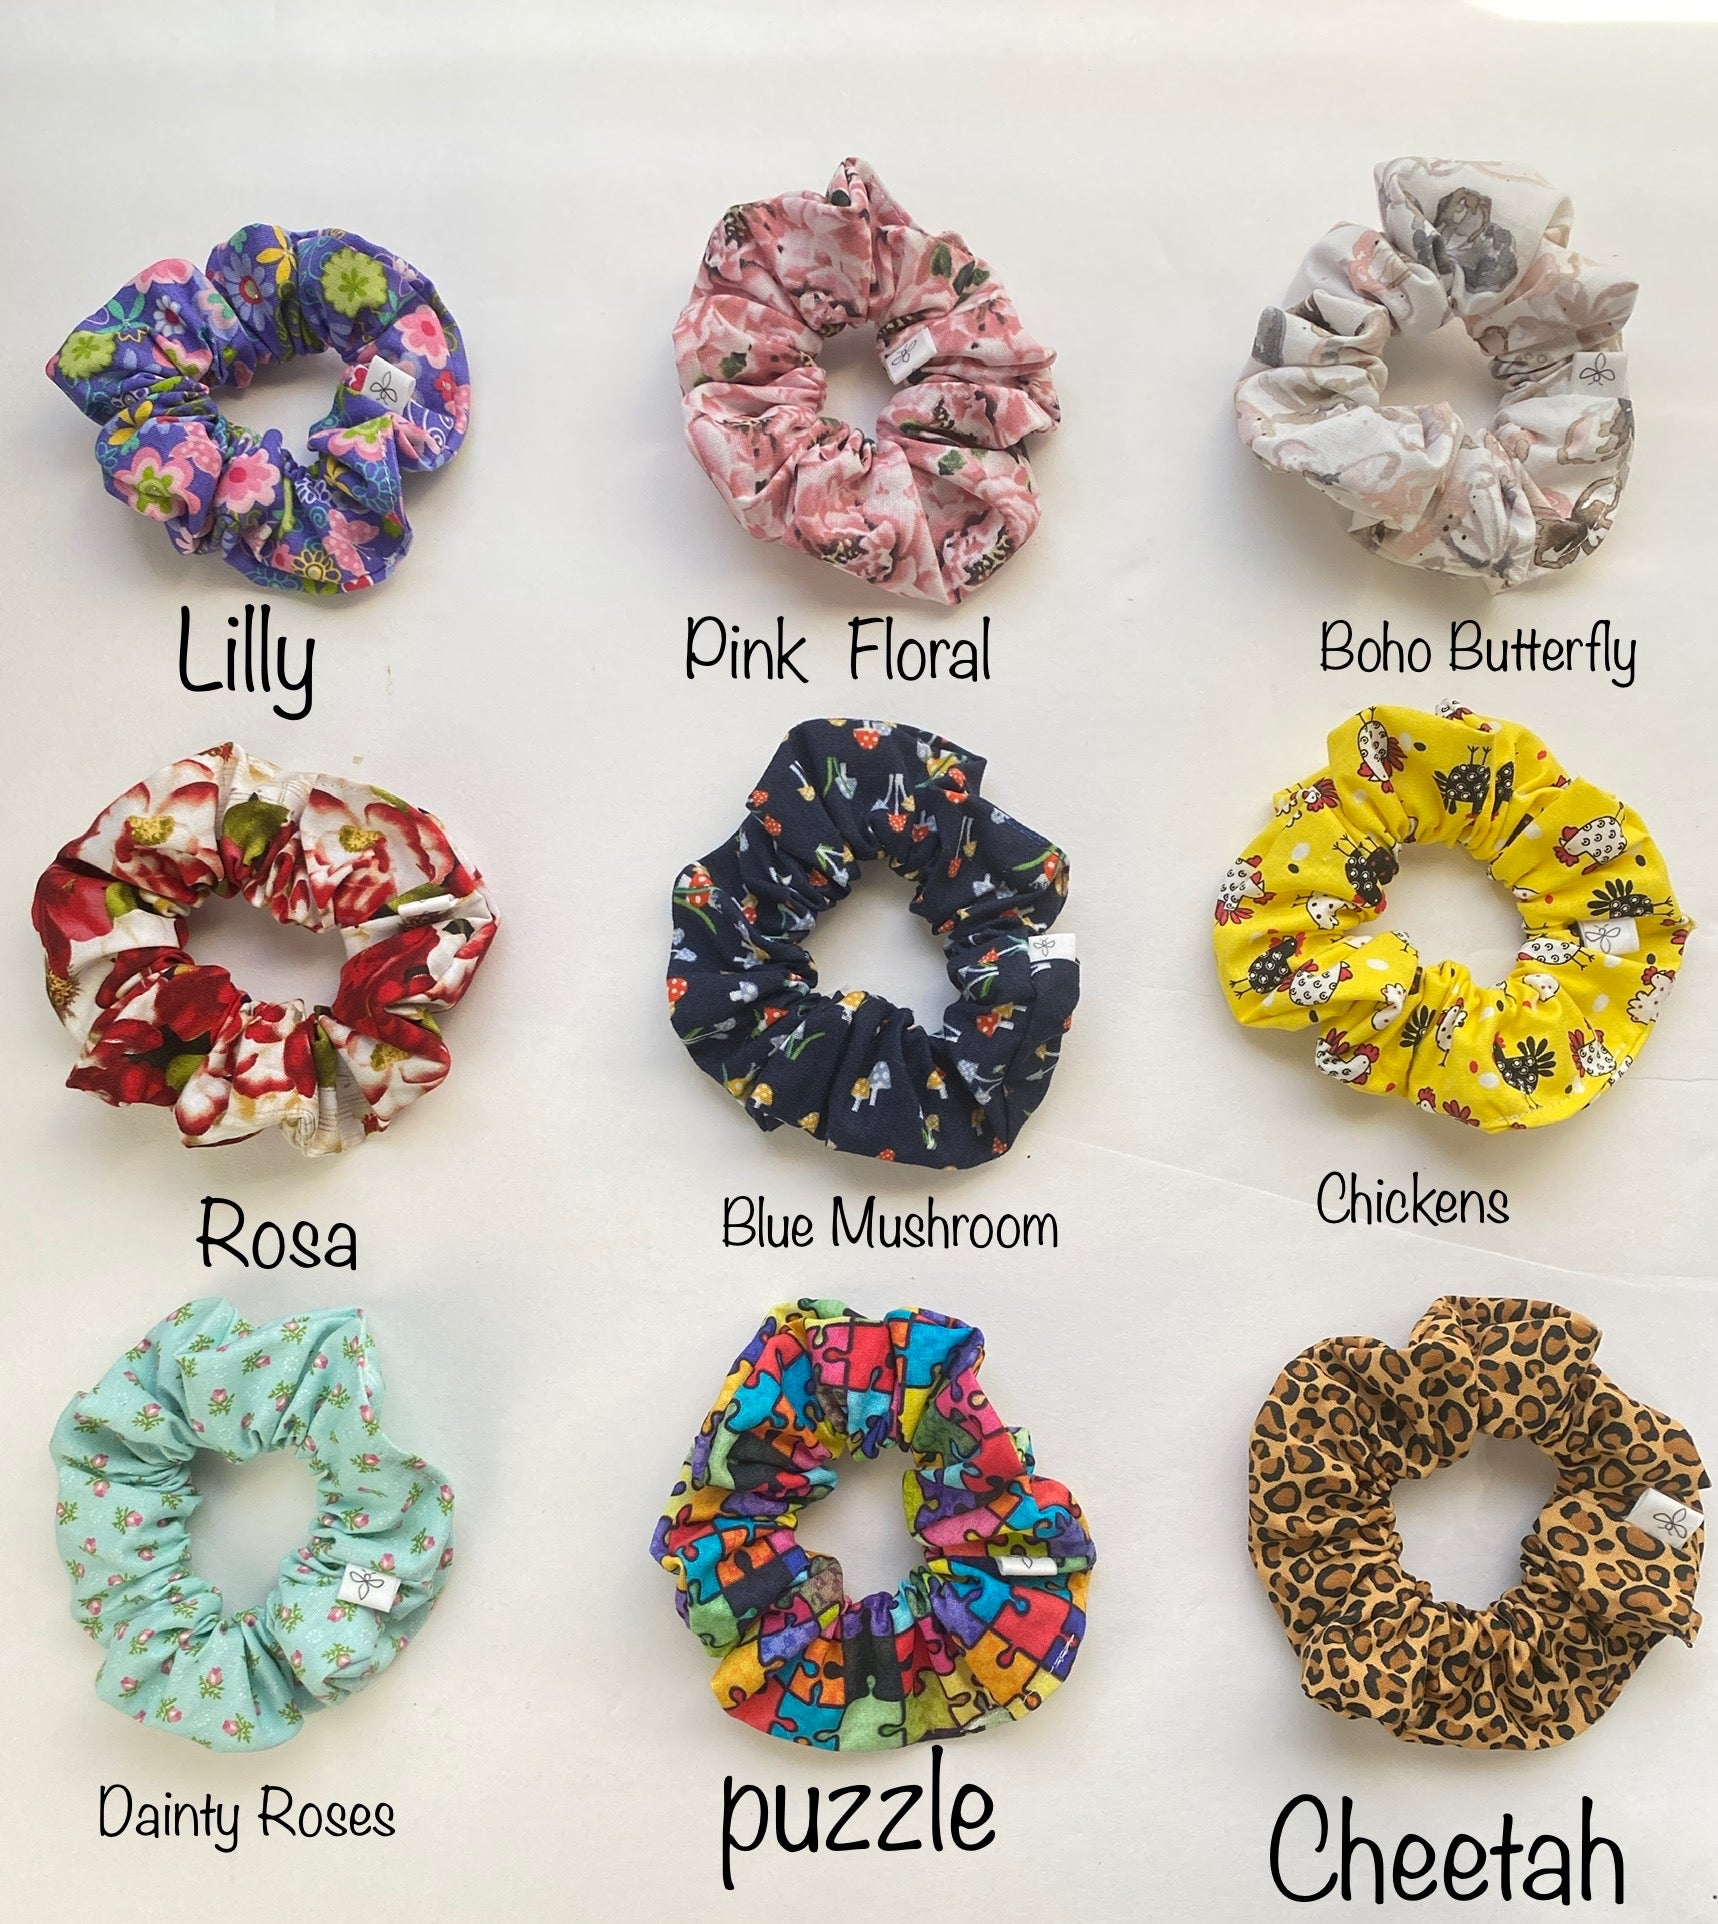 Colorful assortment of patterned scrunchies, vibrate collection of hair ties for a trendy look added to your ponytail or messy bun.